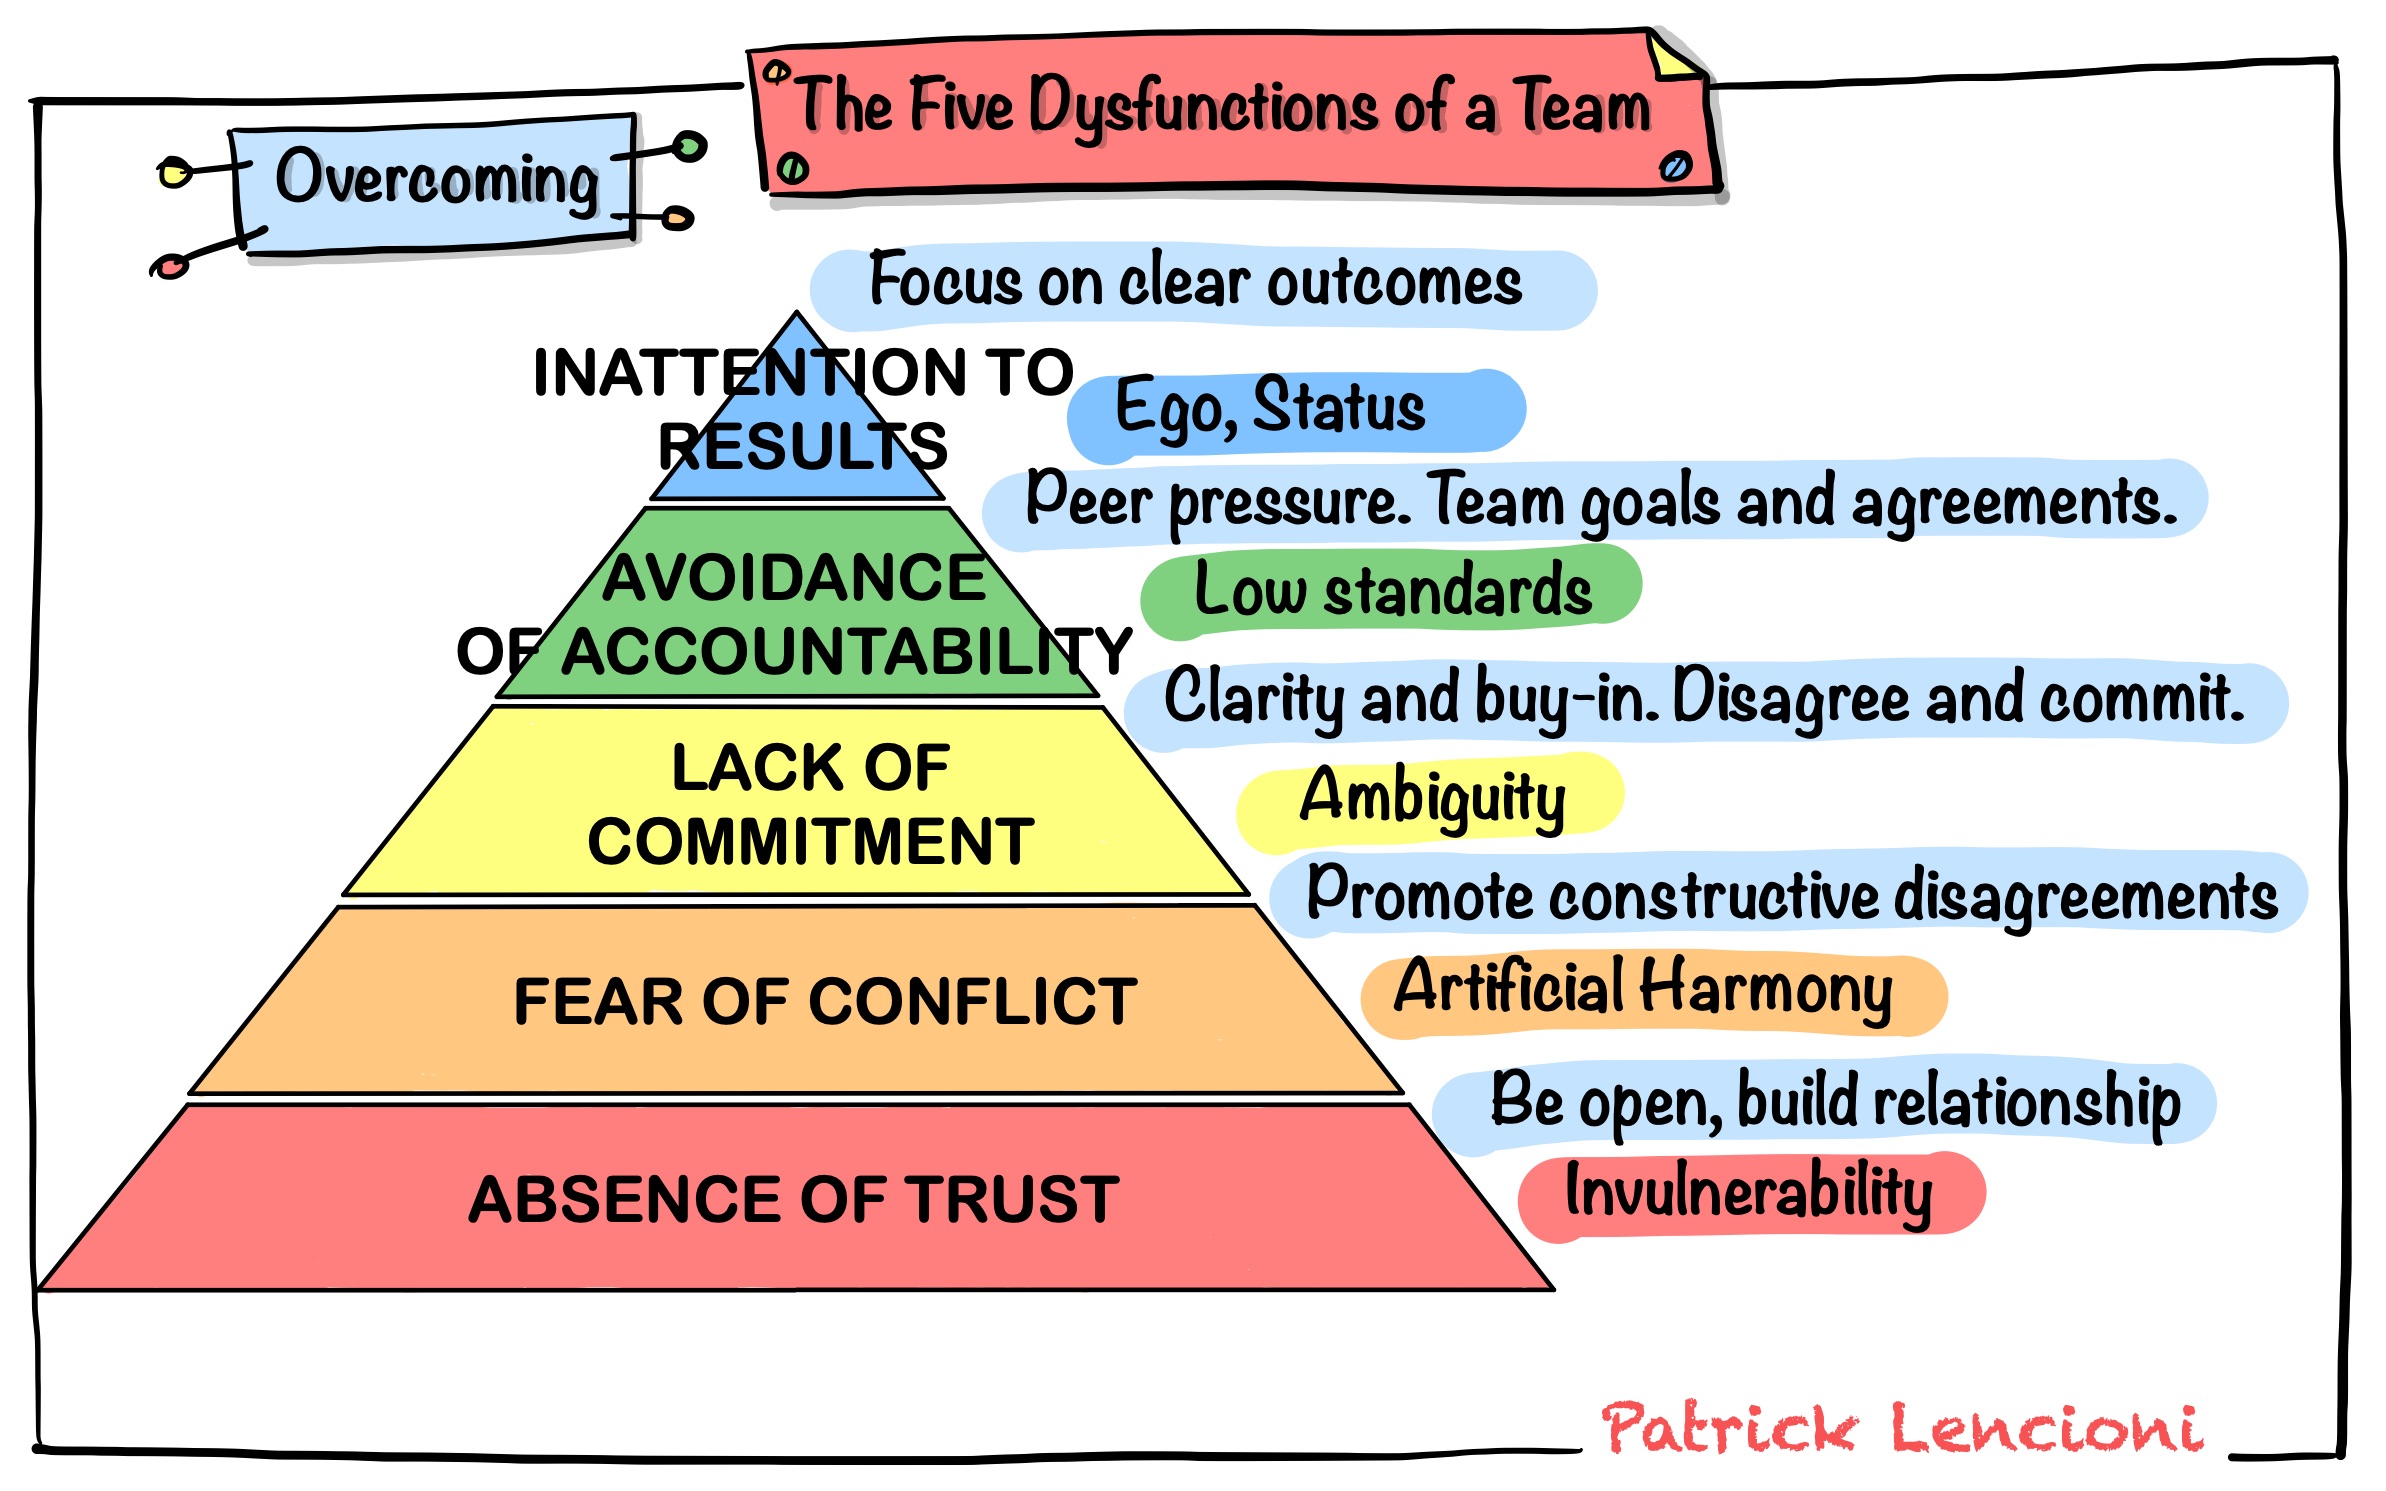 How I run “The Five Dysfunctions of a Team” workshop